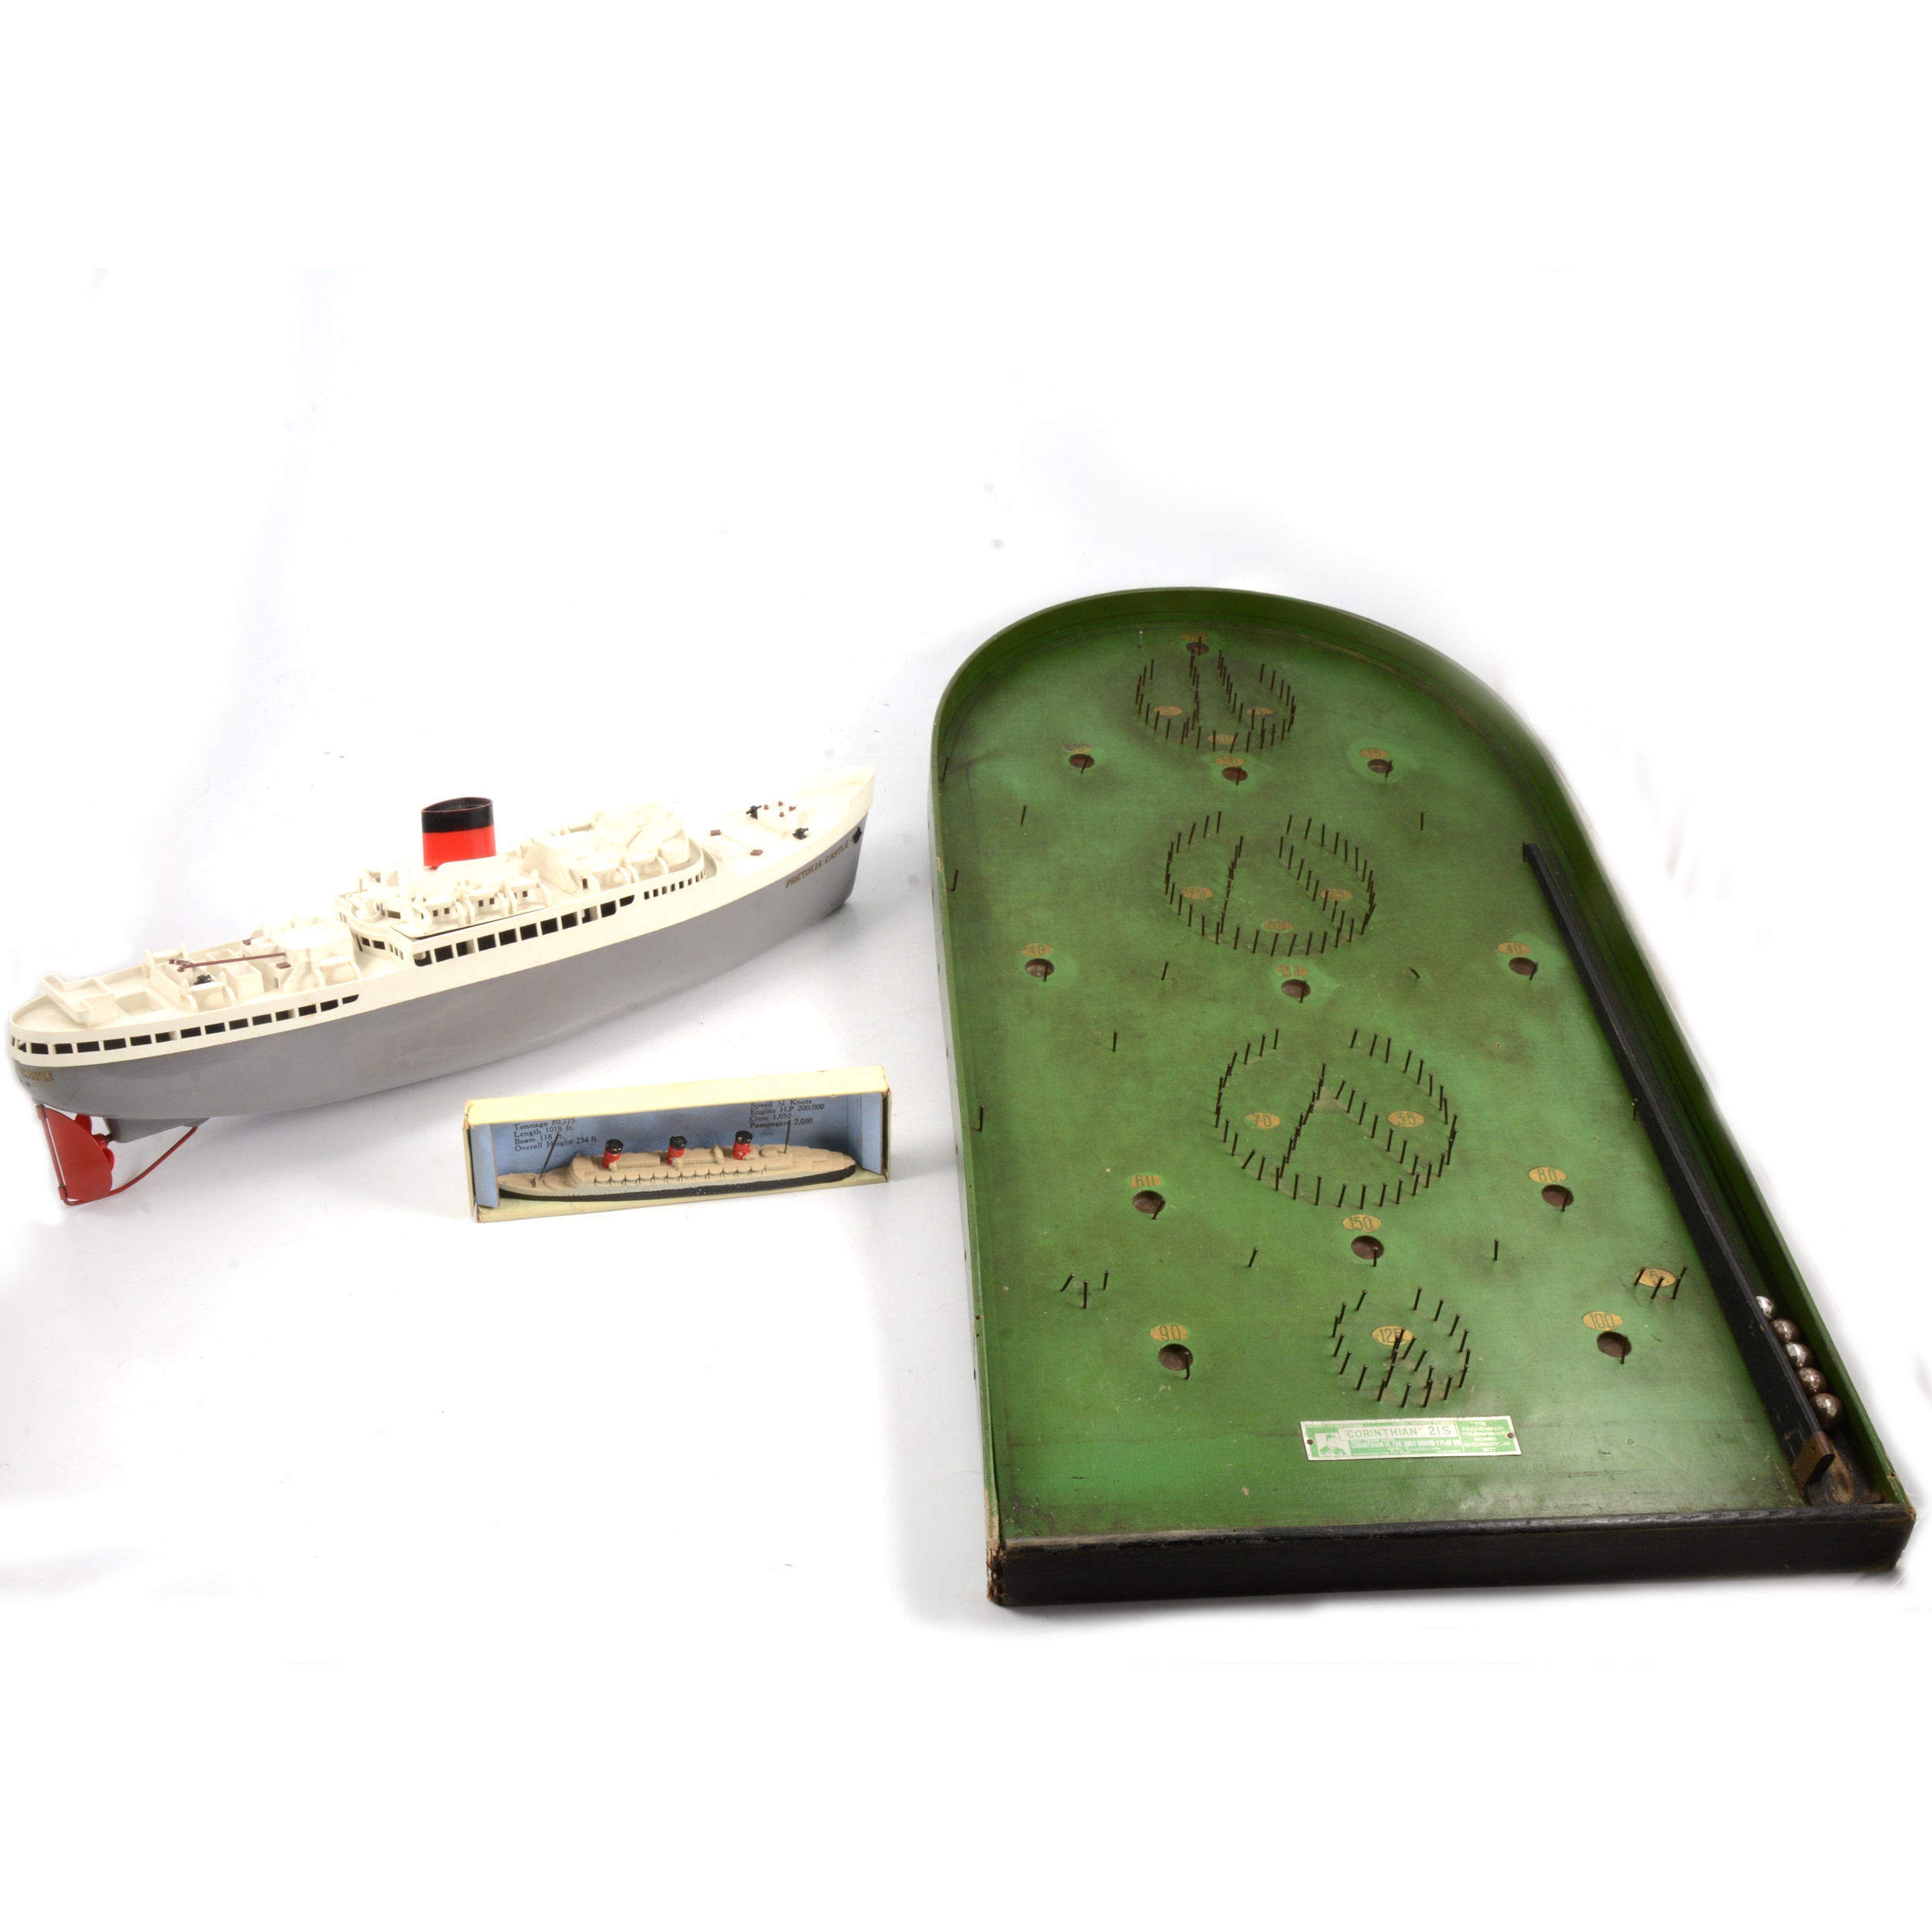 Tri-ang Ocean Liner, Chad Valley boat and a Bagatelle board.